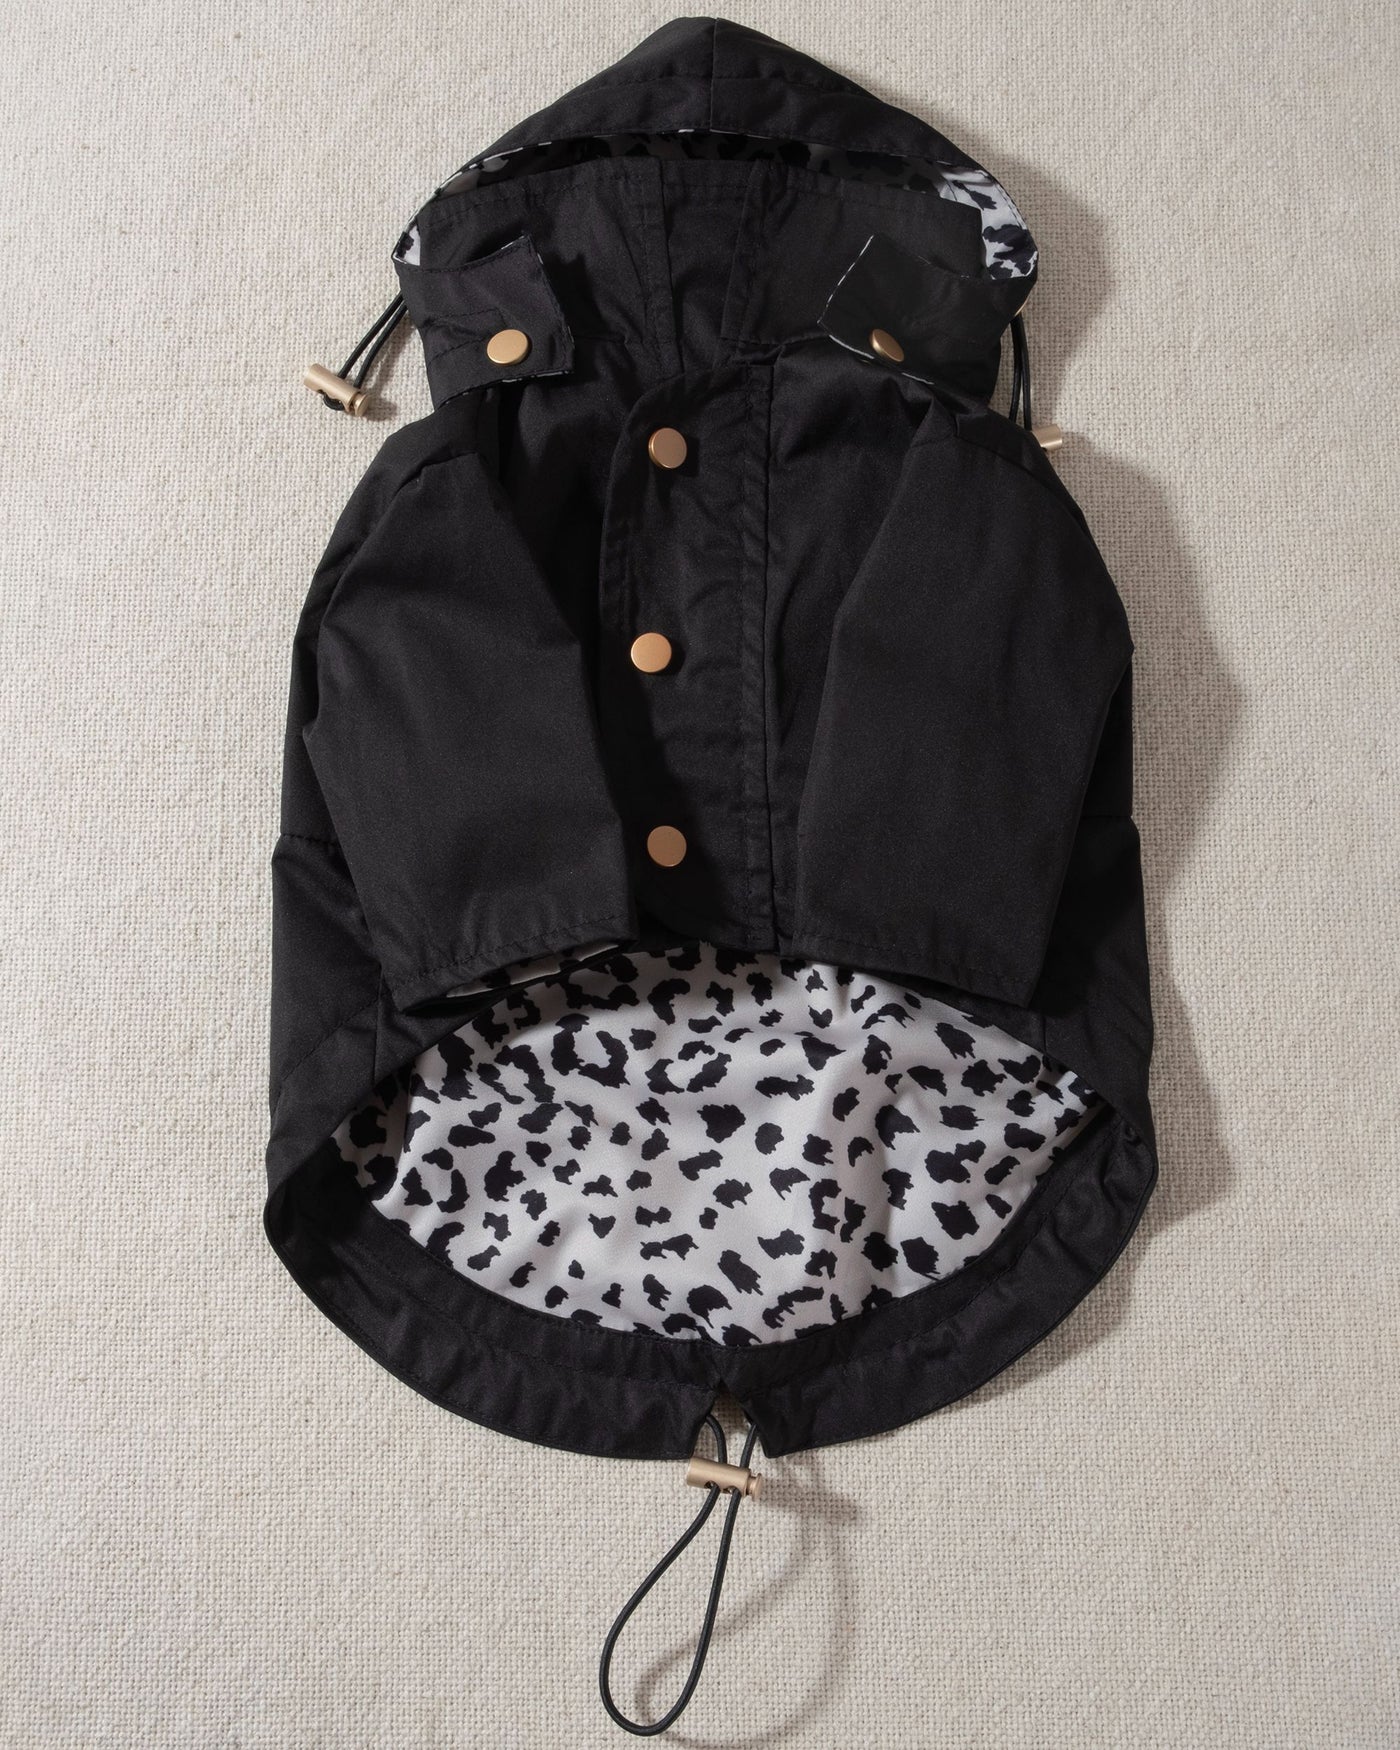 black dog raincoat with leopard print lining and removable hood